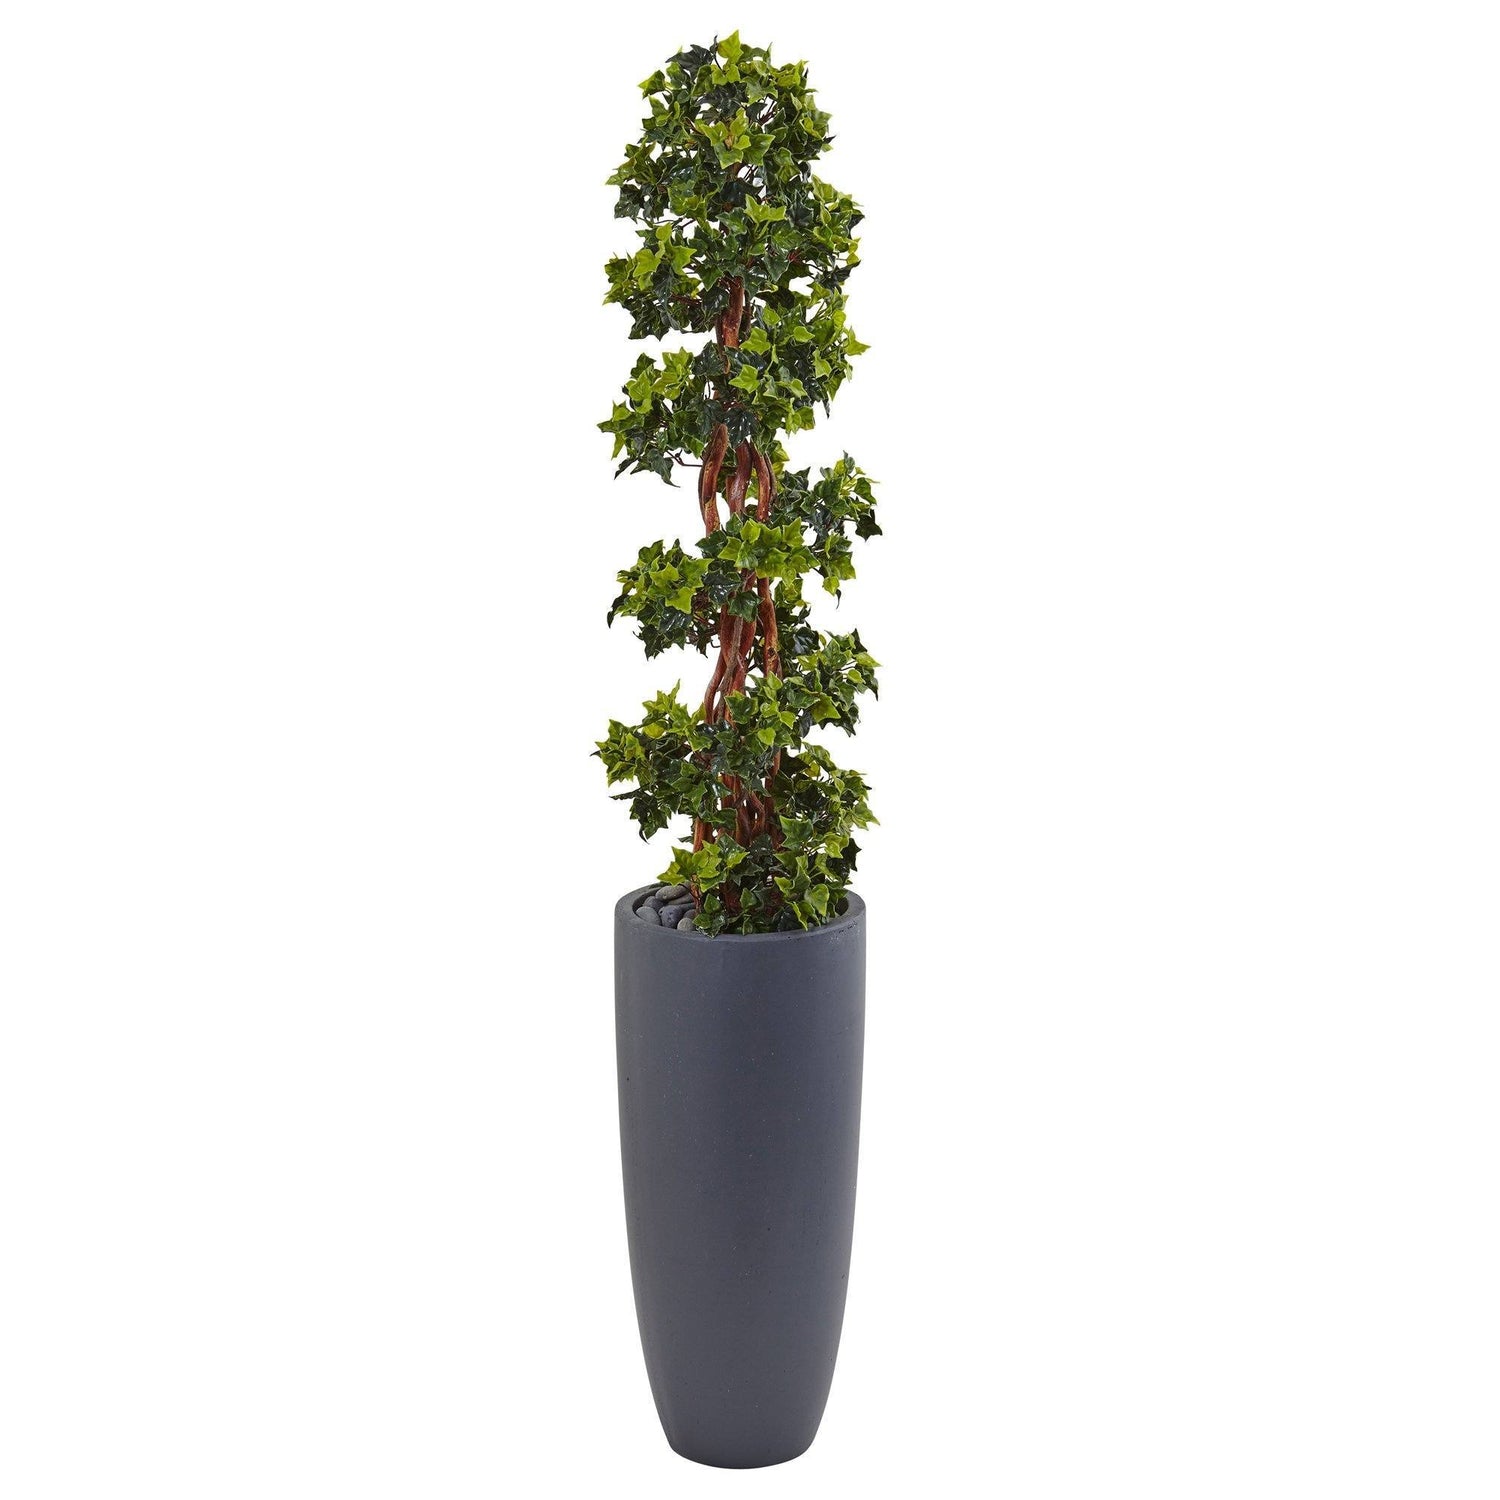 5’ English Ivy Spiral Topiary Tree in Gray Cylinder Planter UV Resistant (Indoor/Outdoor)